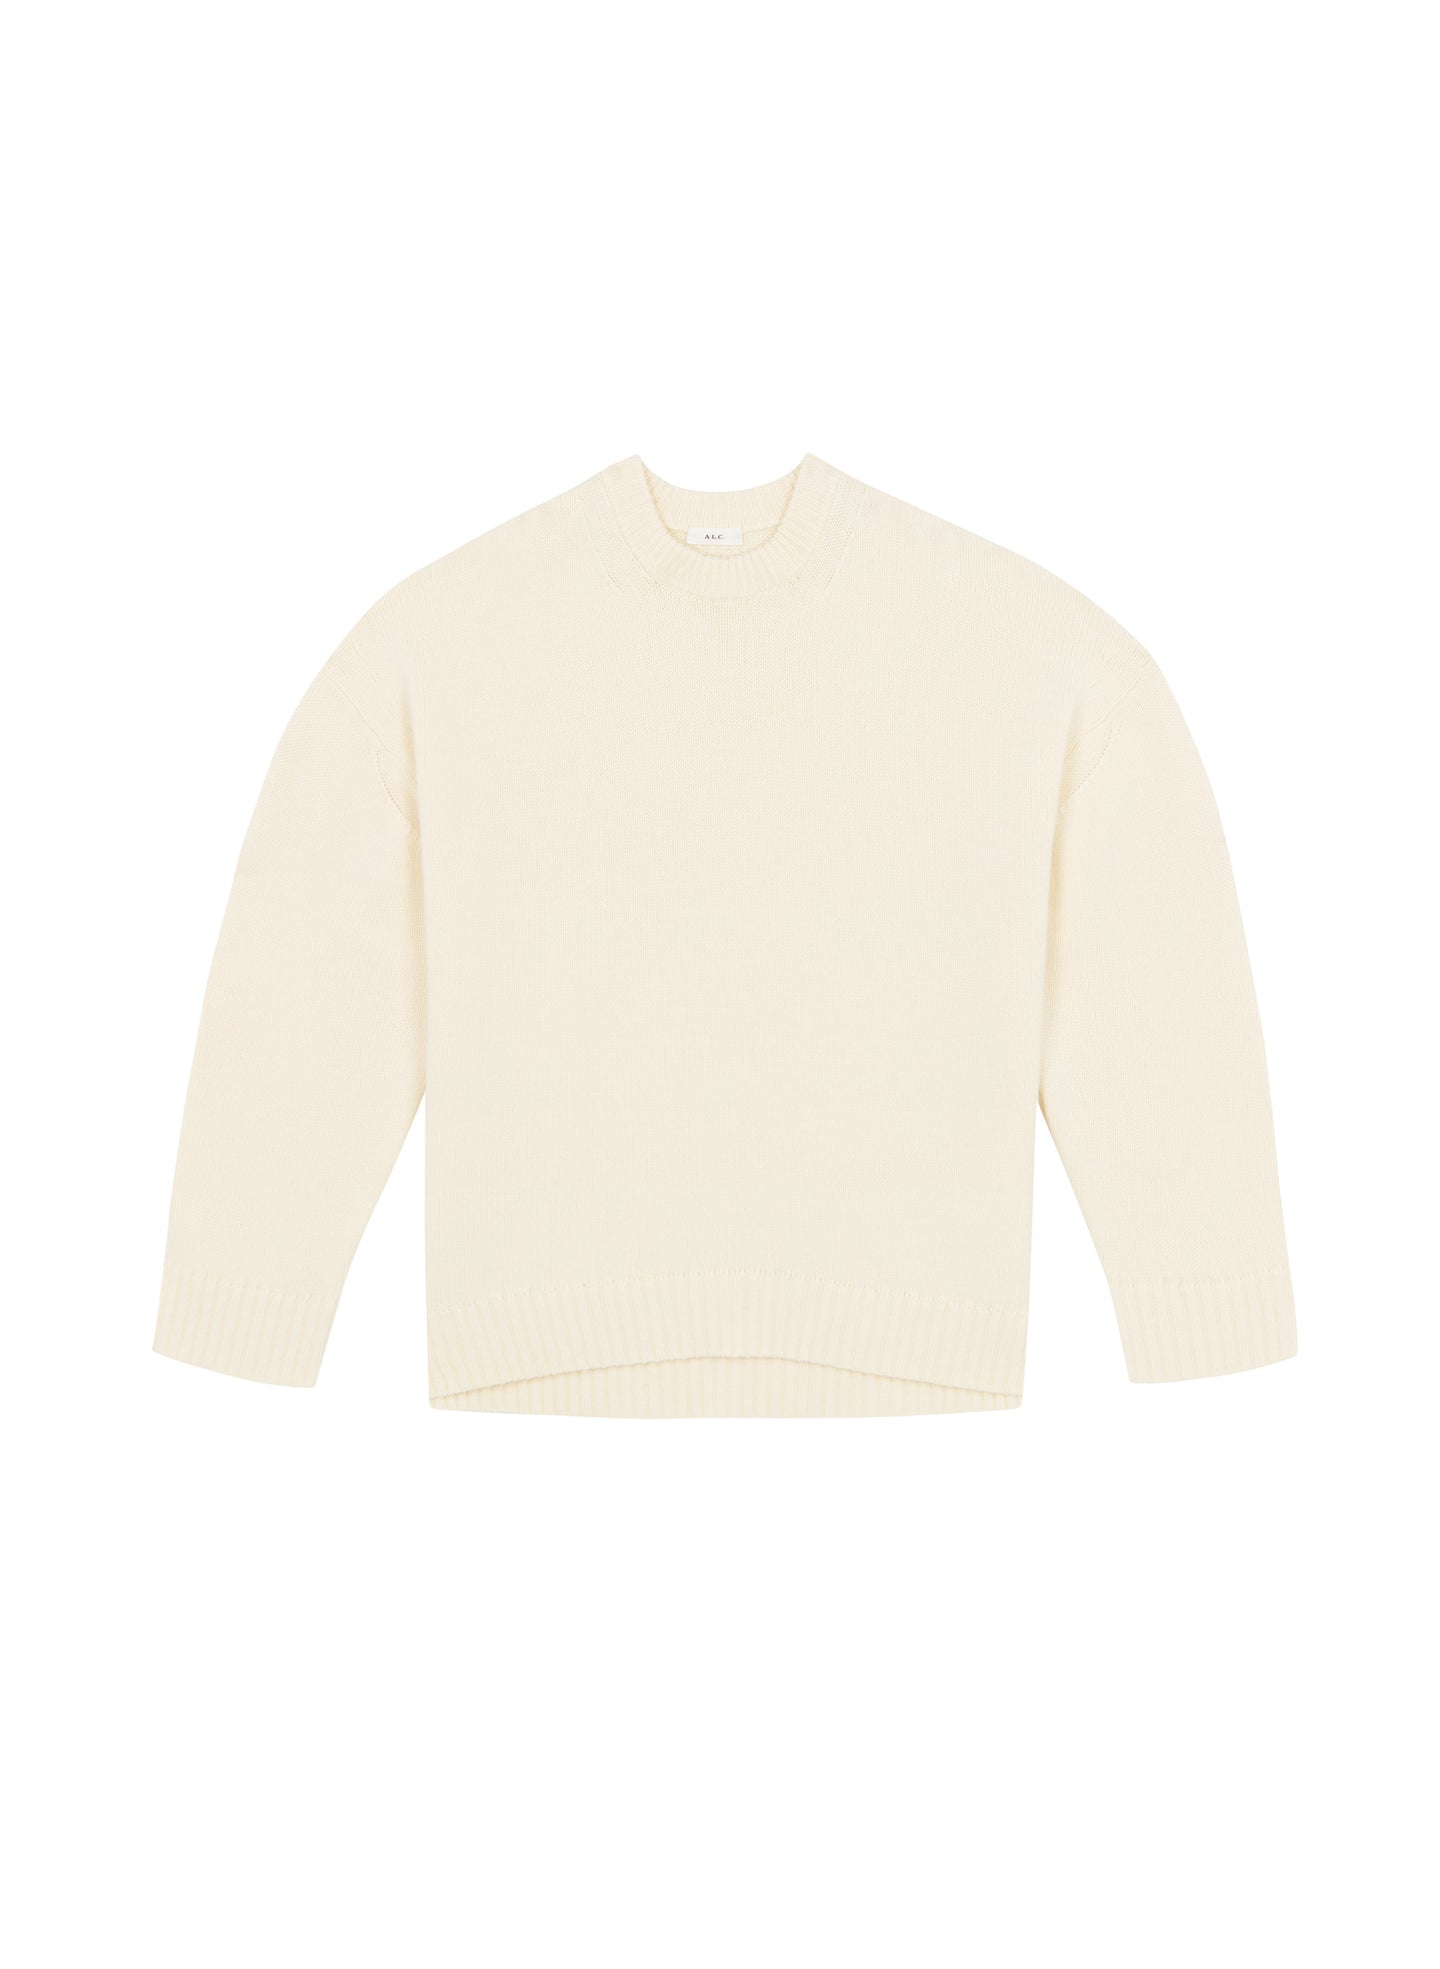 flat lay view of  off white cashmere long sleeve sweater